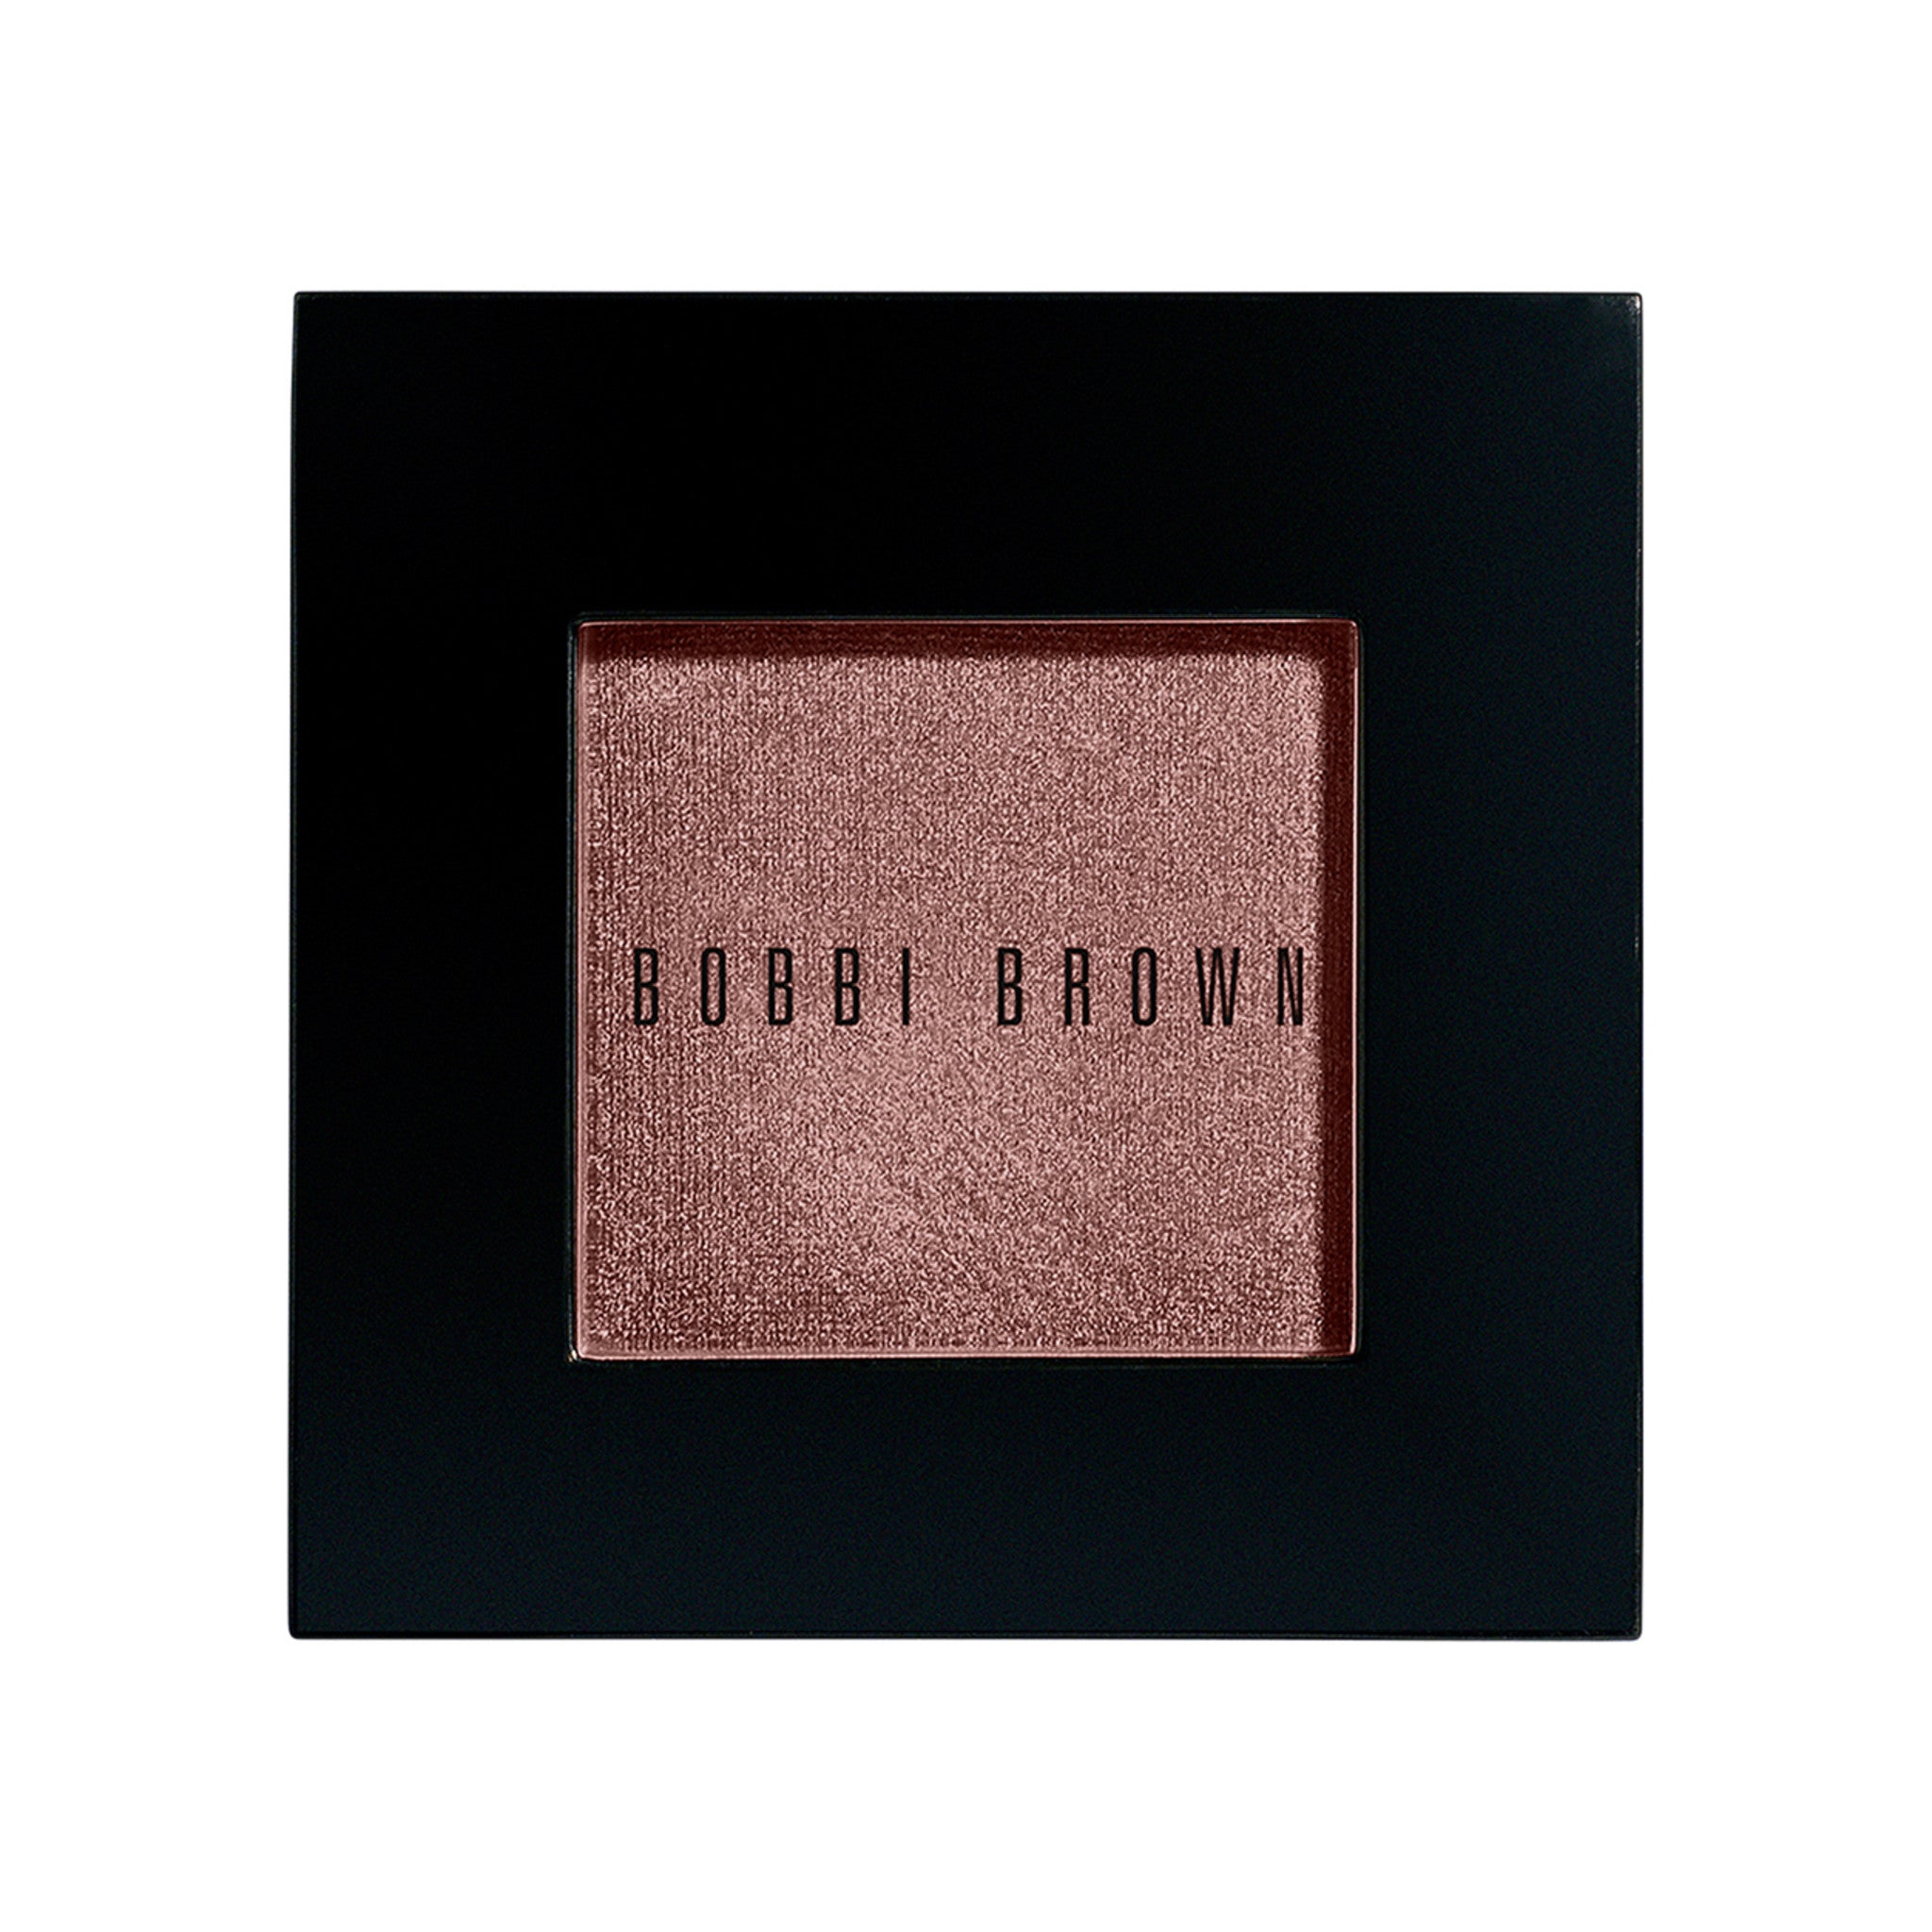 Bobbi Brown Metallic Eye Shadow Color/Shade variant: Cognac main image. This product is in the color nude